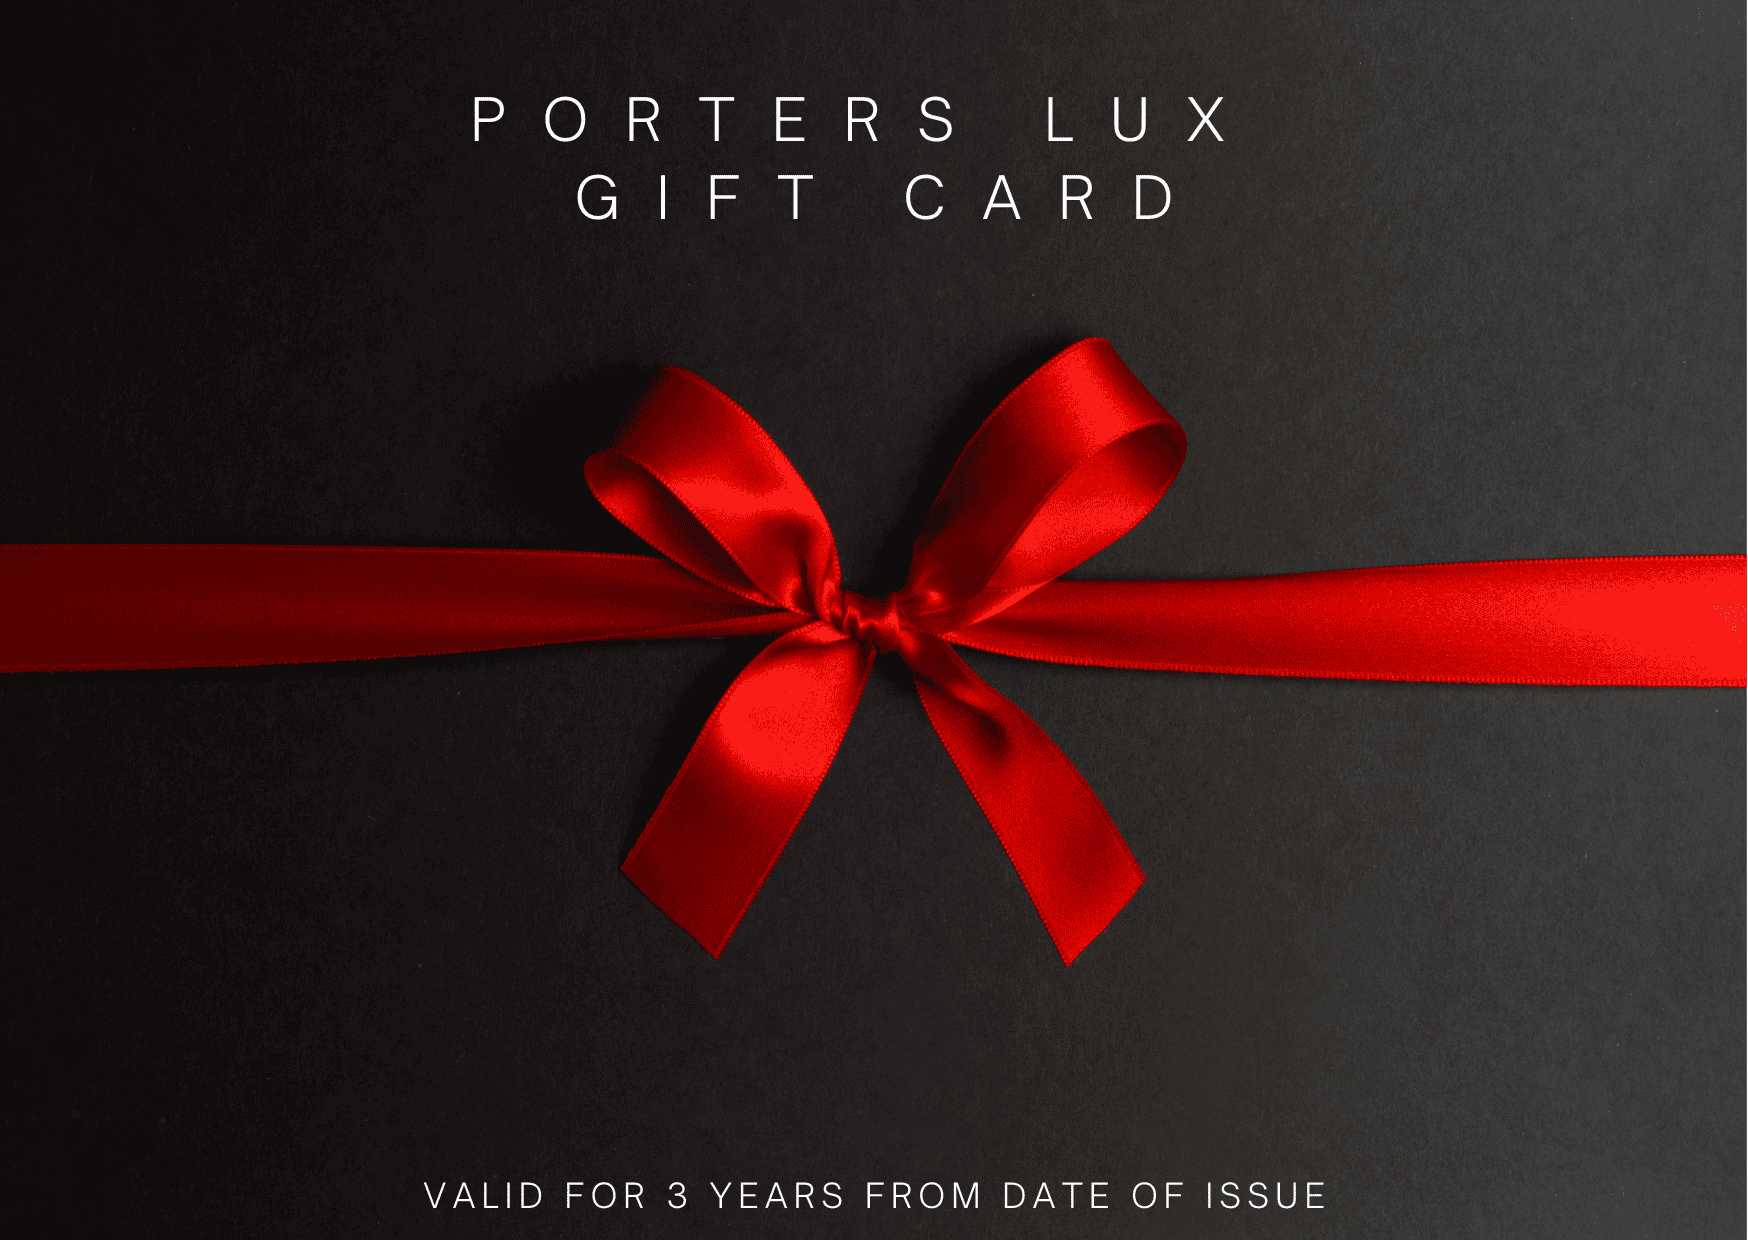 Porters Lux Gift Card